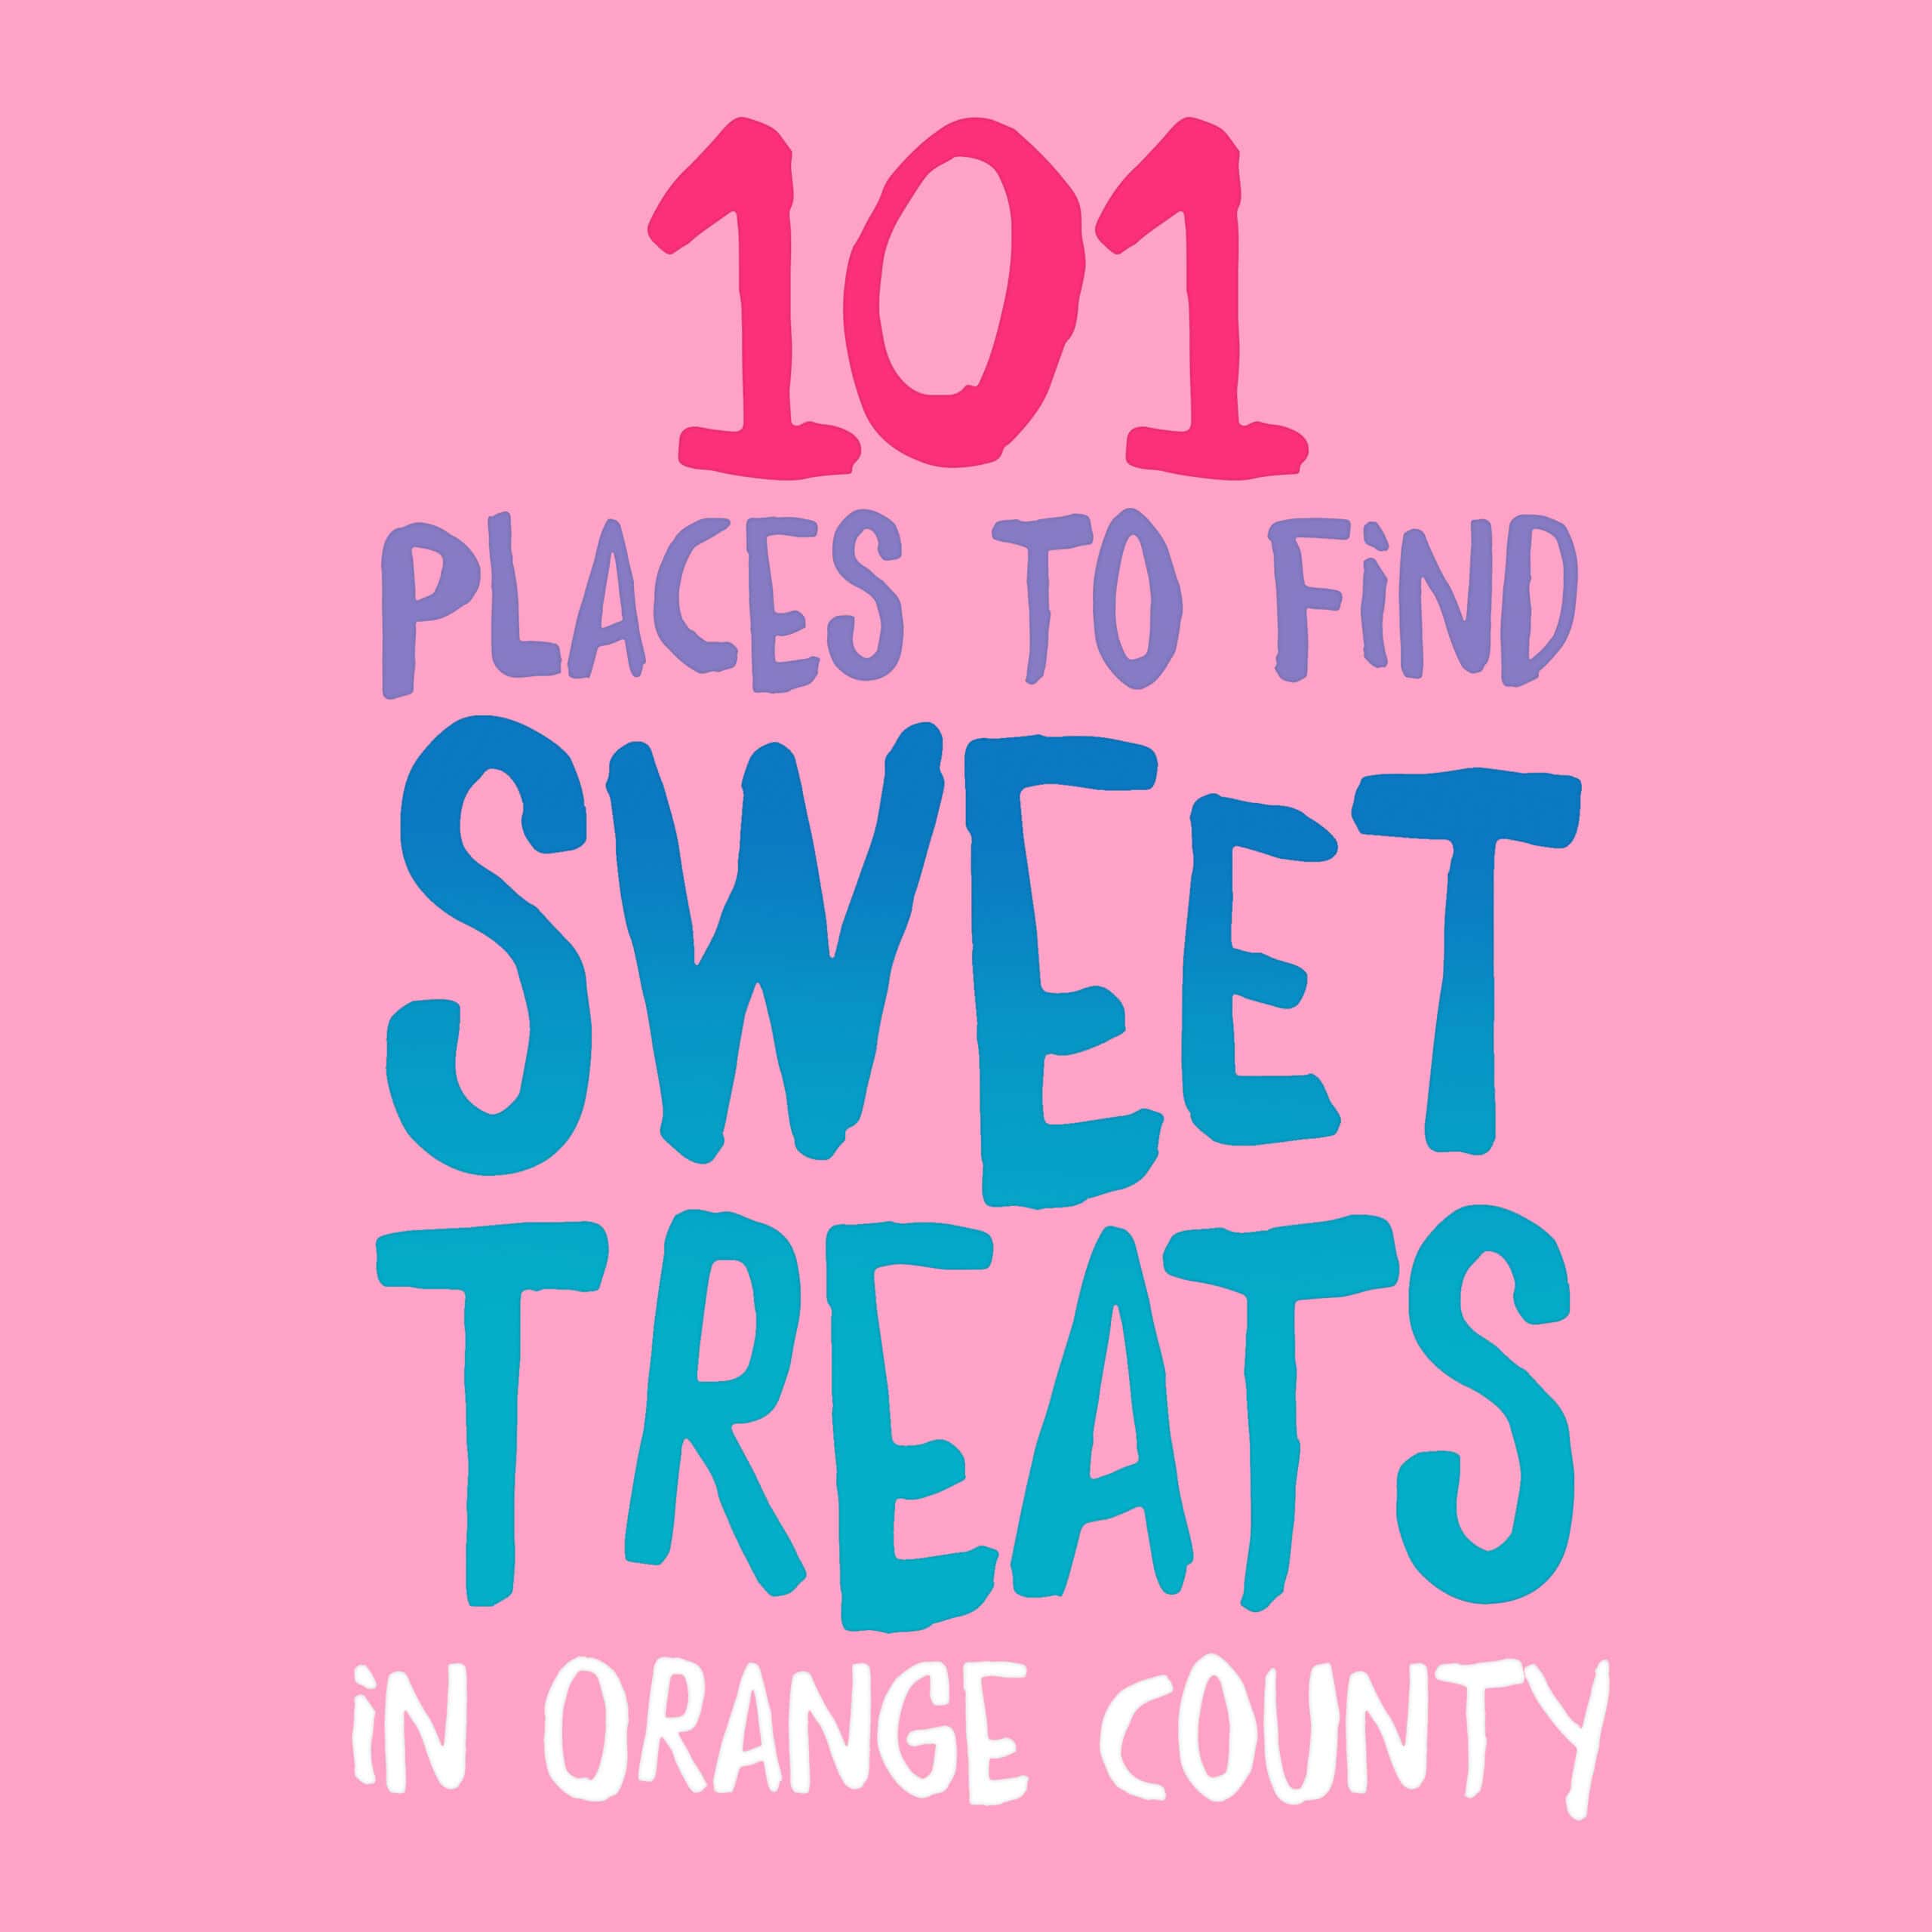 101 Places to find the best Desserts, Treats, Ice cream and candy in Orange County California 